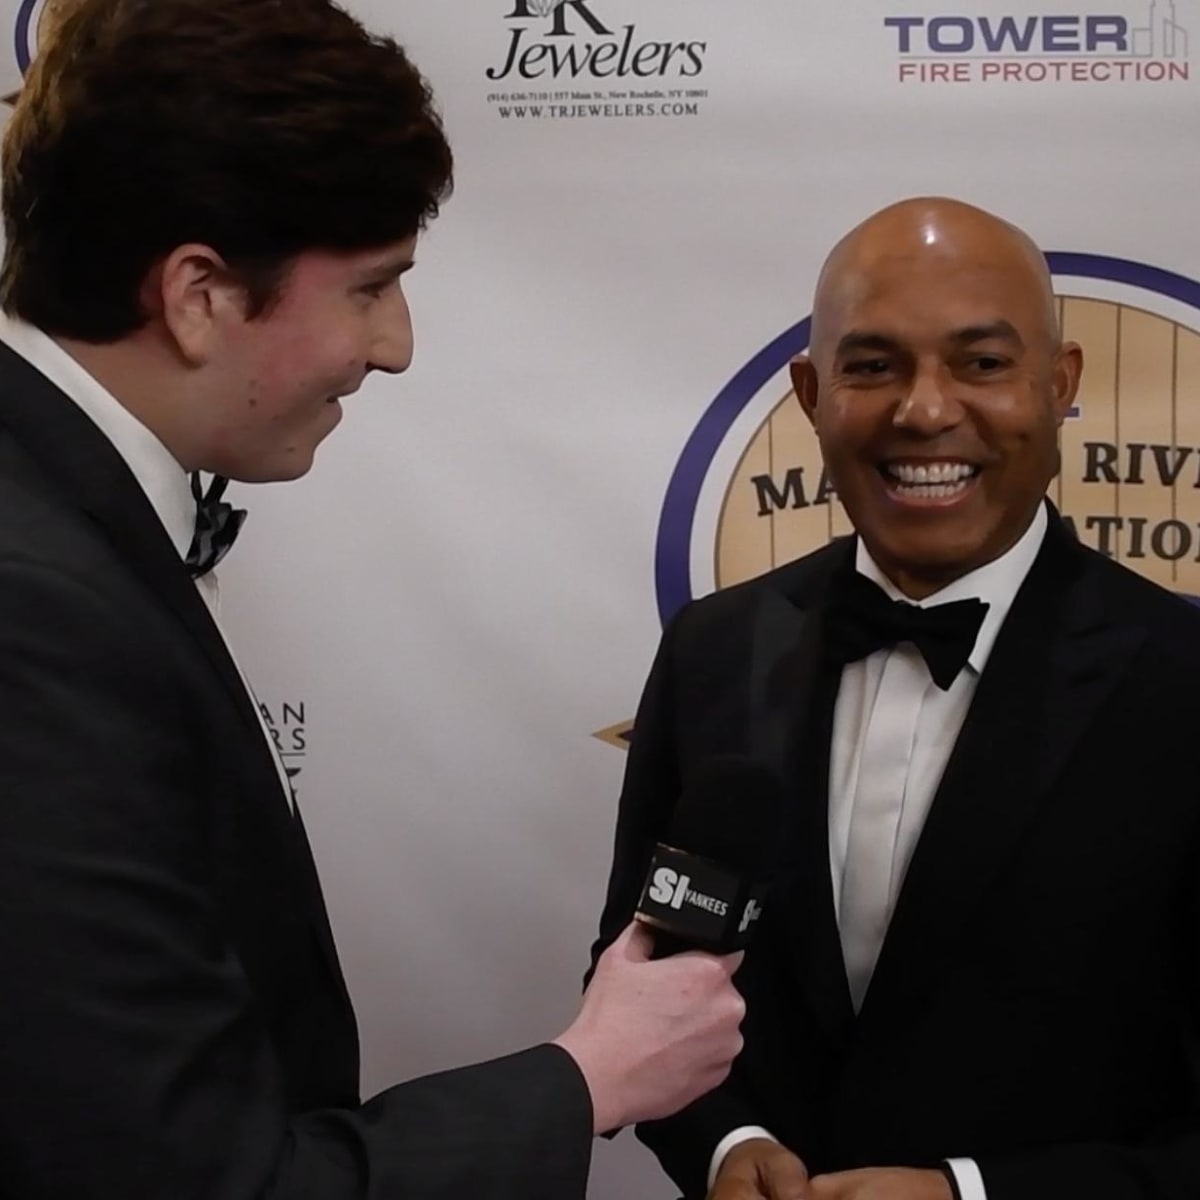 Atlantic and The Mariano Rivera Foundation team up to provide